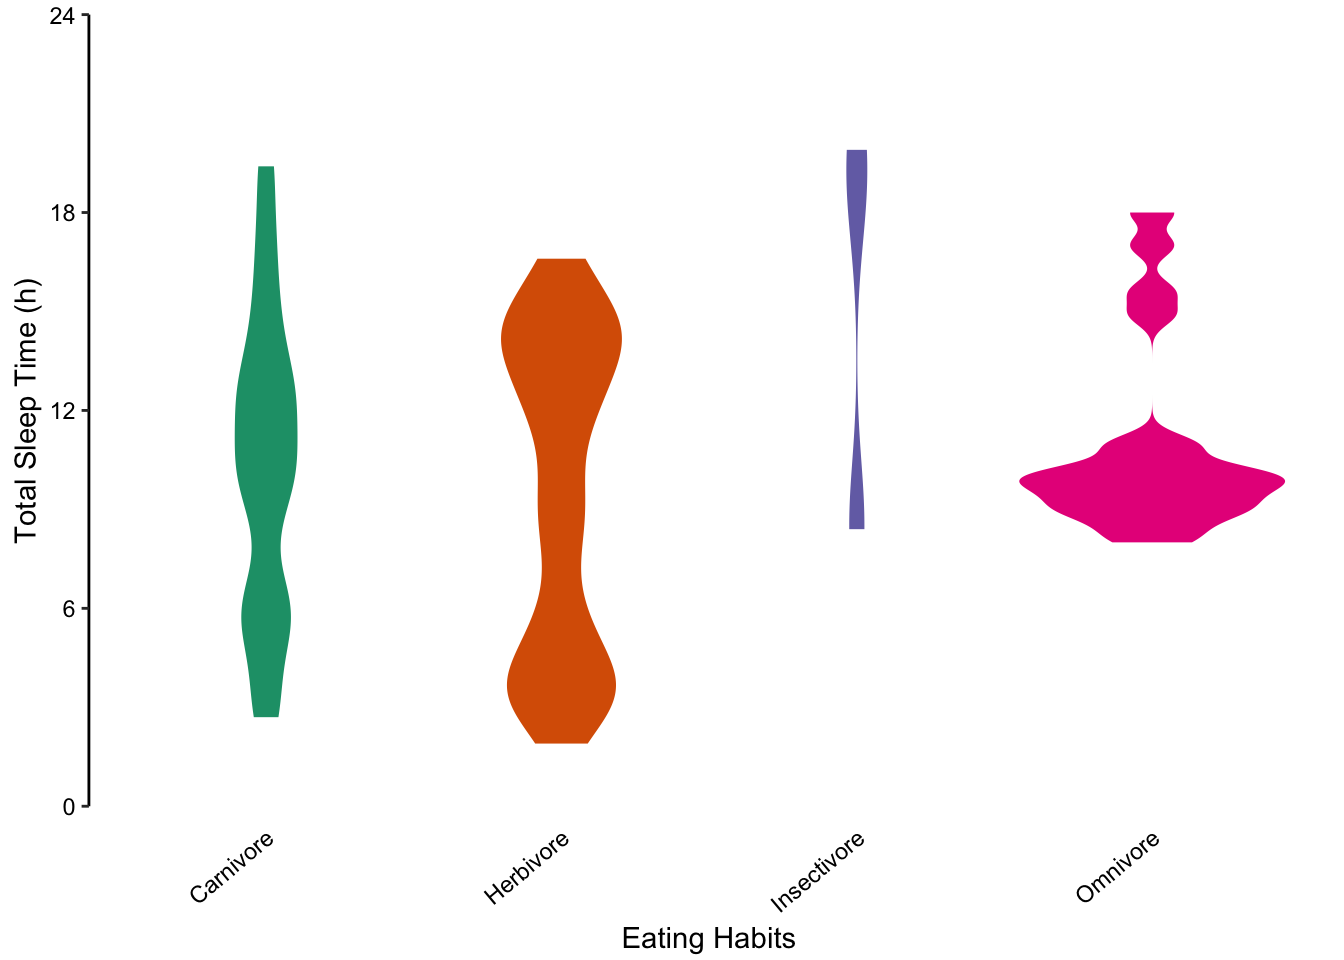 violin plots offer another alternative to bar charts for showing unusual distributions.